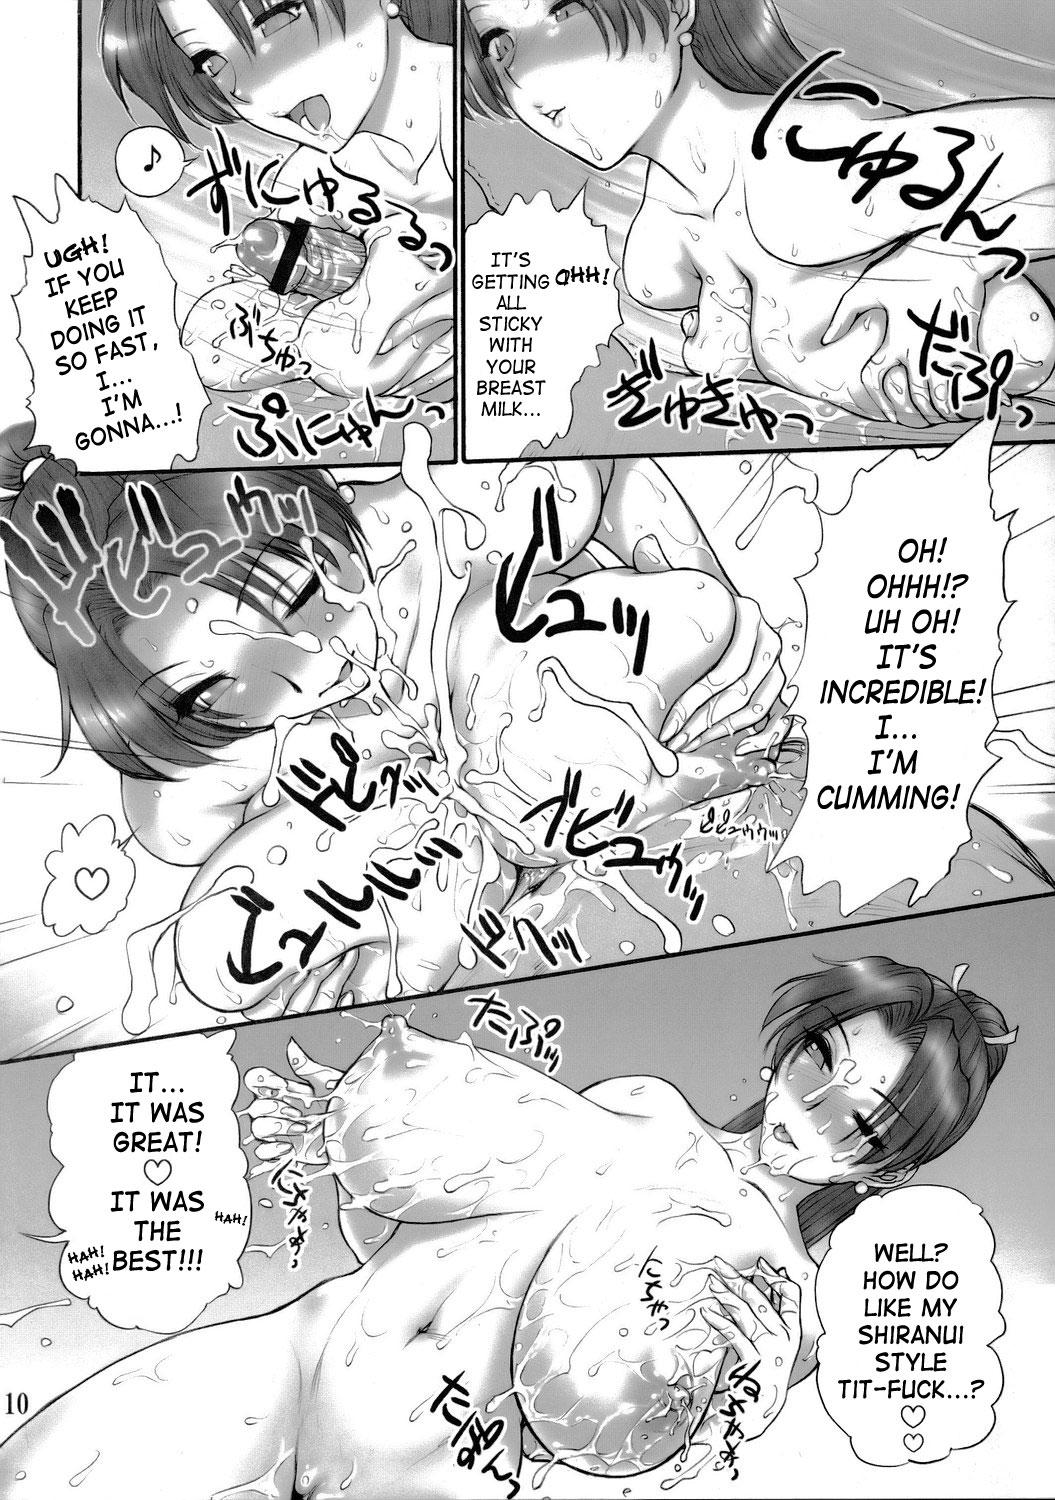 Francais (SC29) [Shinnihon Pepsitou (St. Germain-sal)] Report Concerning Kyoku-gen-ryuu (The King of Fighters) [English] [SaHa] - King of fighters Jock - Page 11